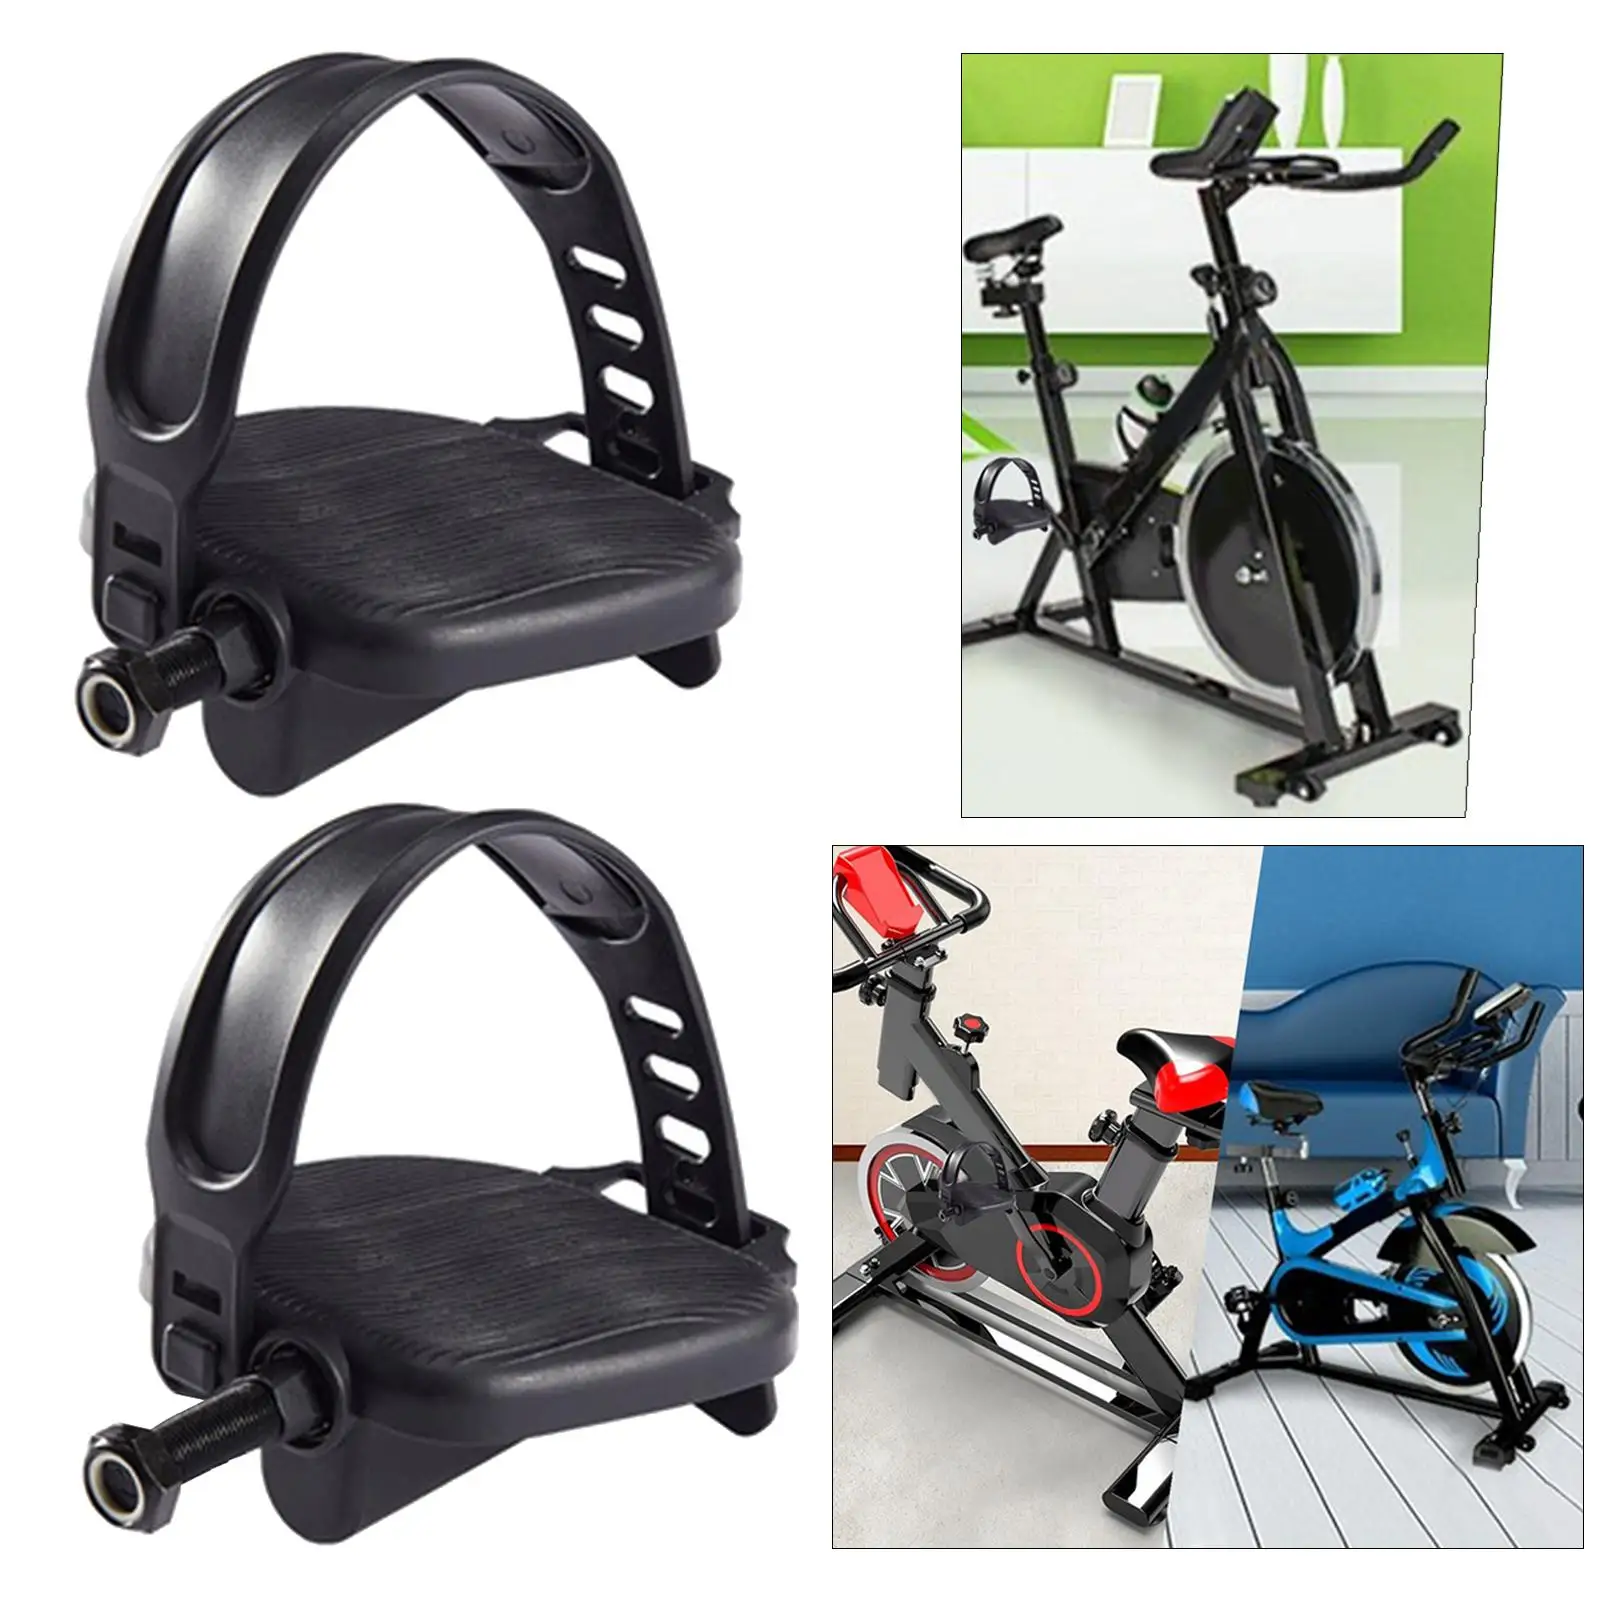 1 Pair Exercise Bike Pedals with Adjustable Straps Fitness Equipment Accessories